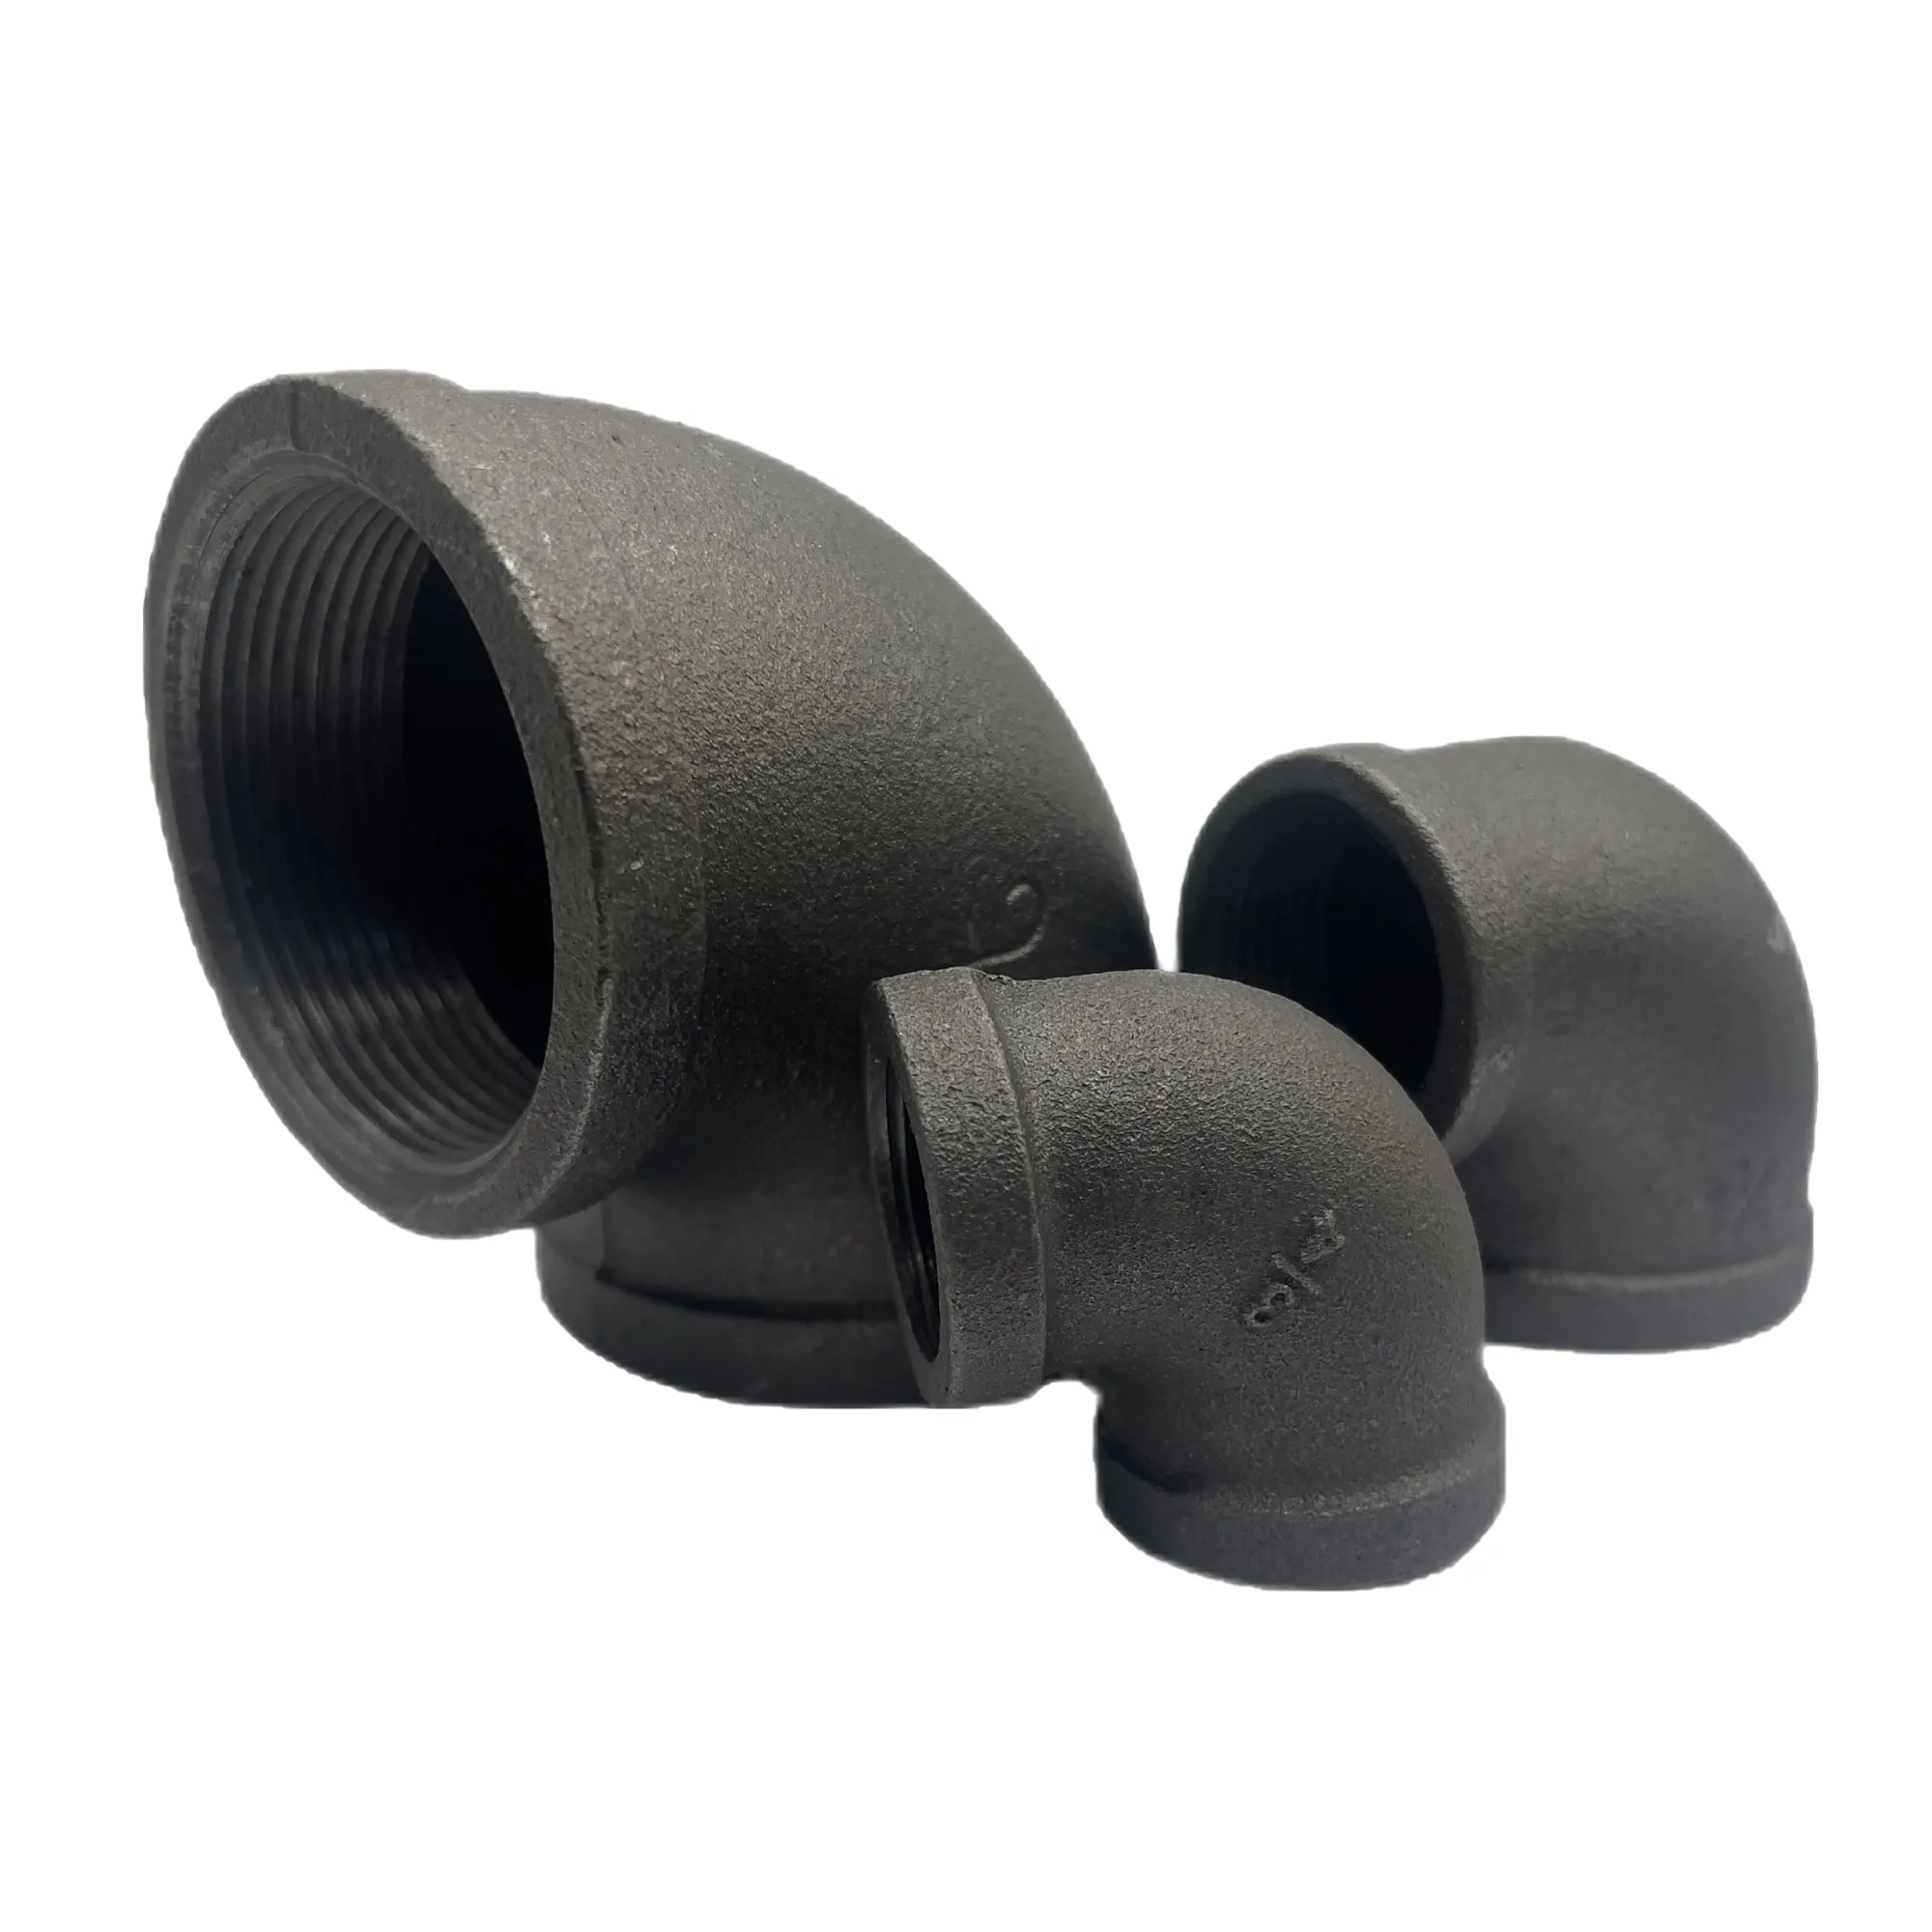 All Sizes Of Pipe Fittings Malleable Iron Quick Release Pipe Clamp Fittings 90 Degree Elbow